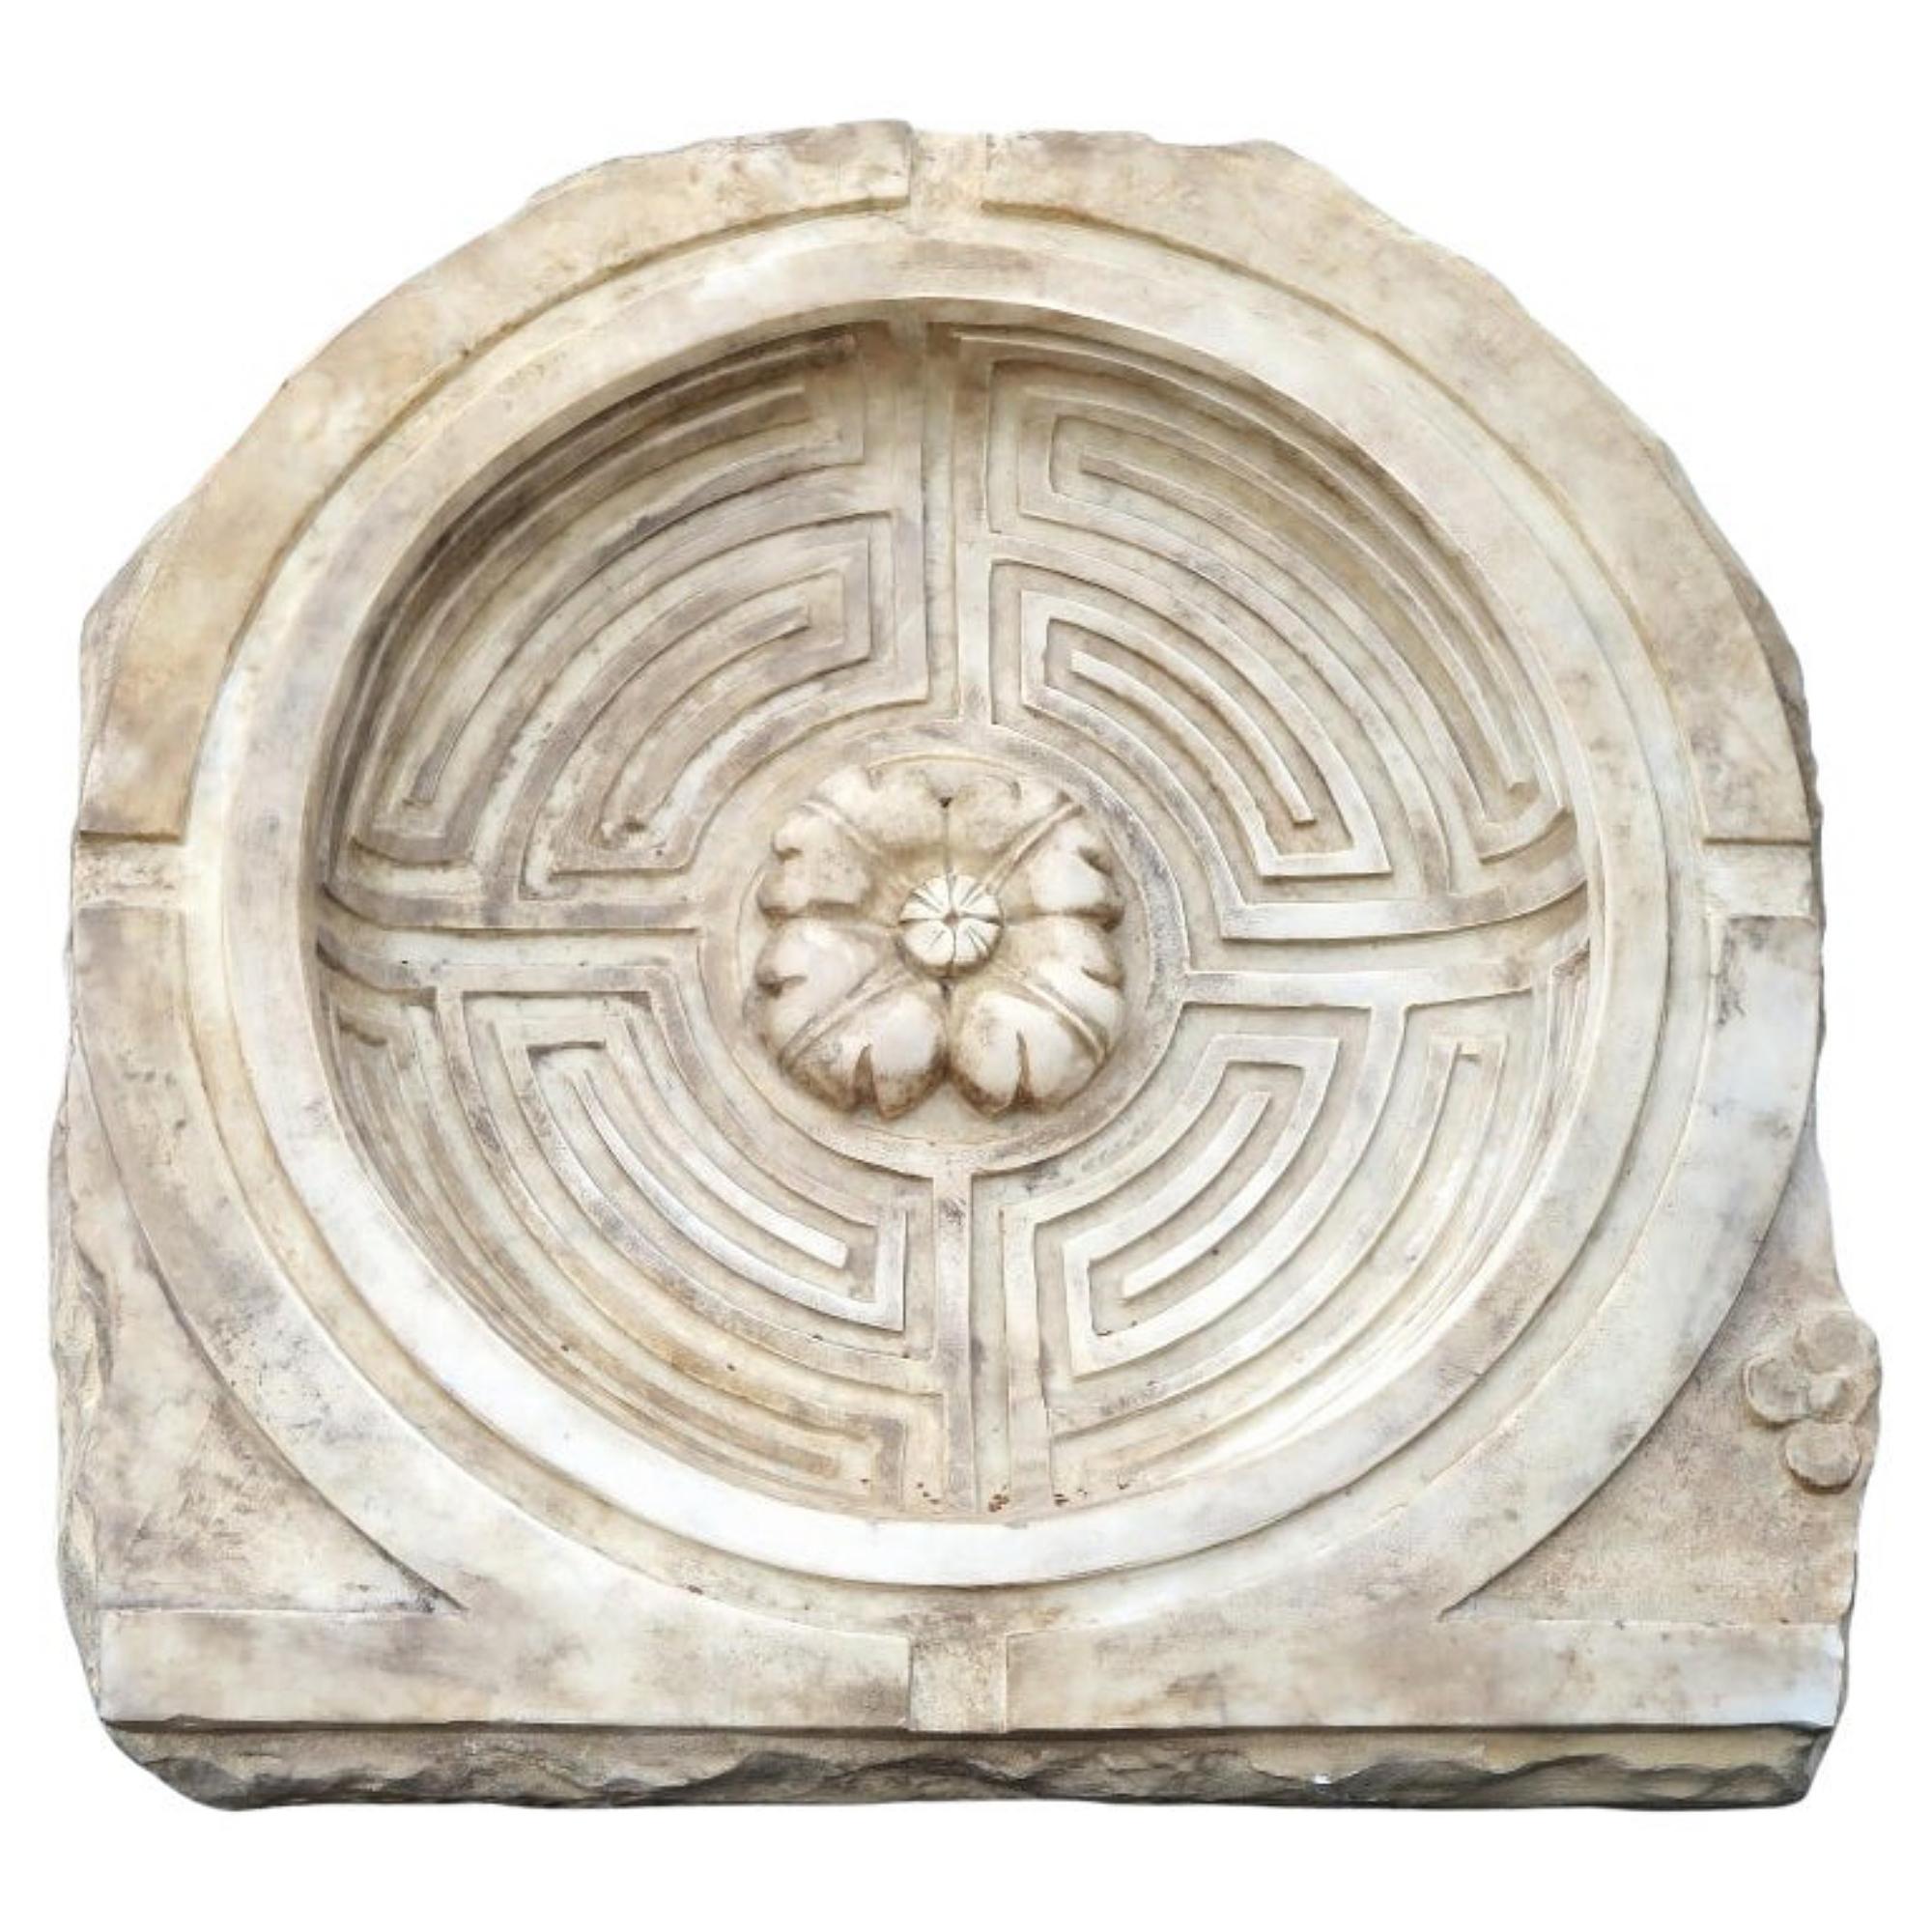 Hand-Crafted Labyrinth Di Side 'Anatolia' White Carrara Marble, Late 19th Century For Sale